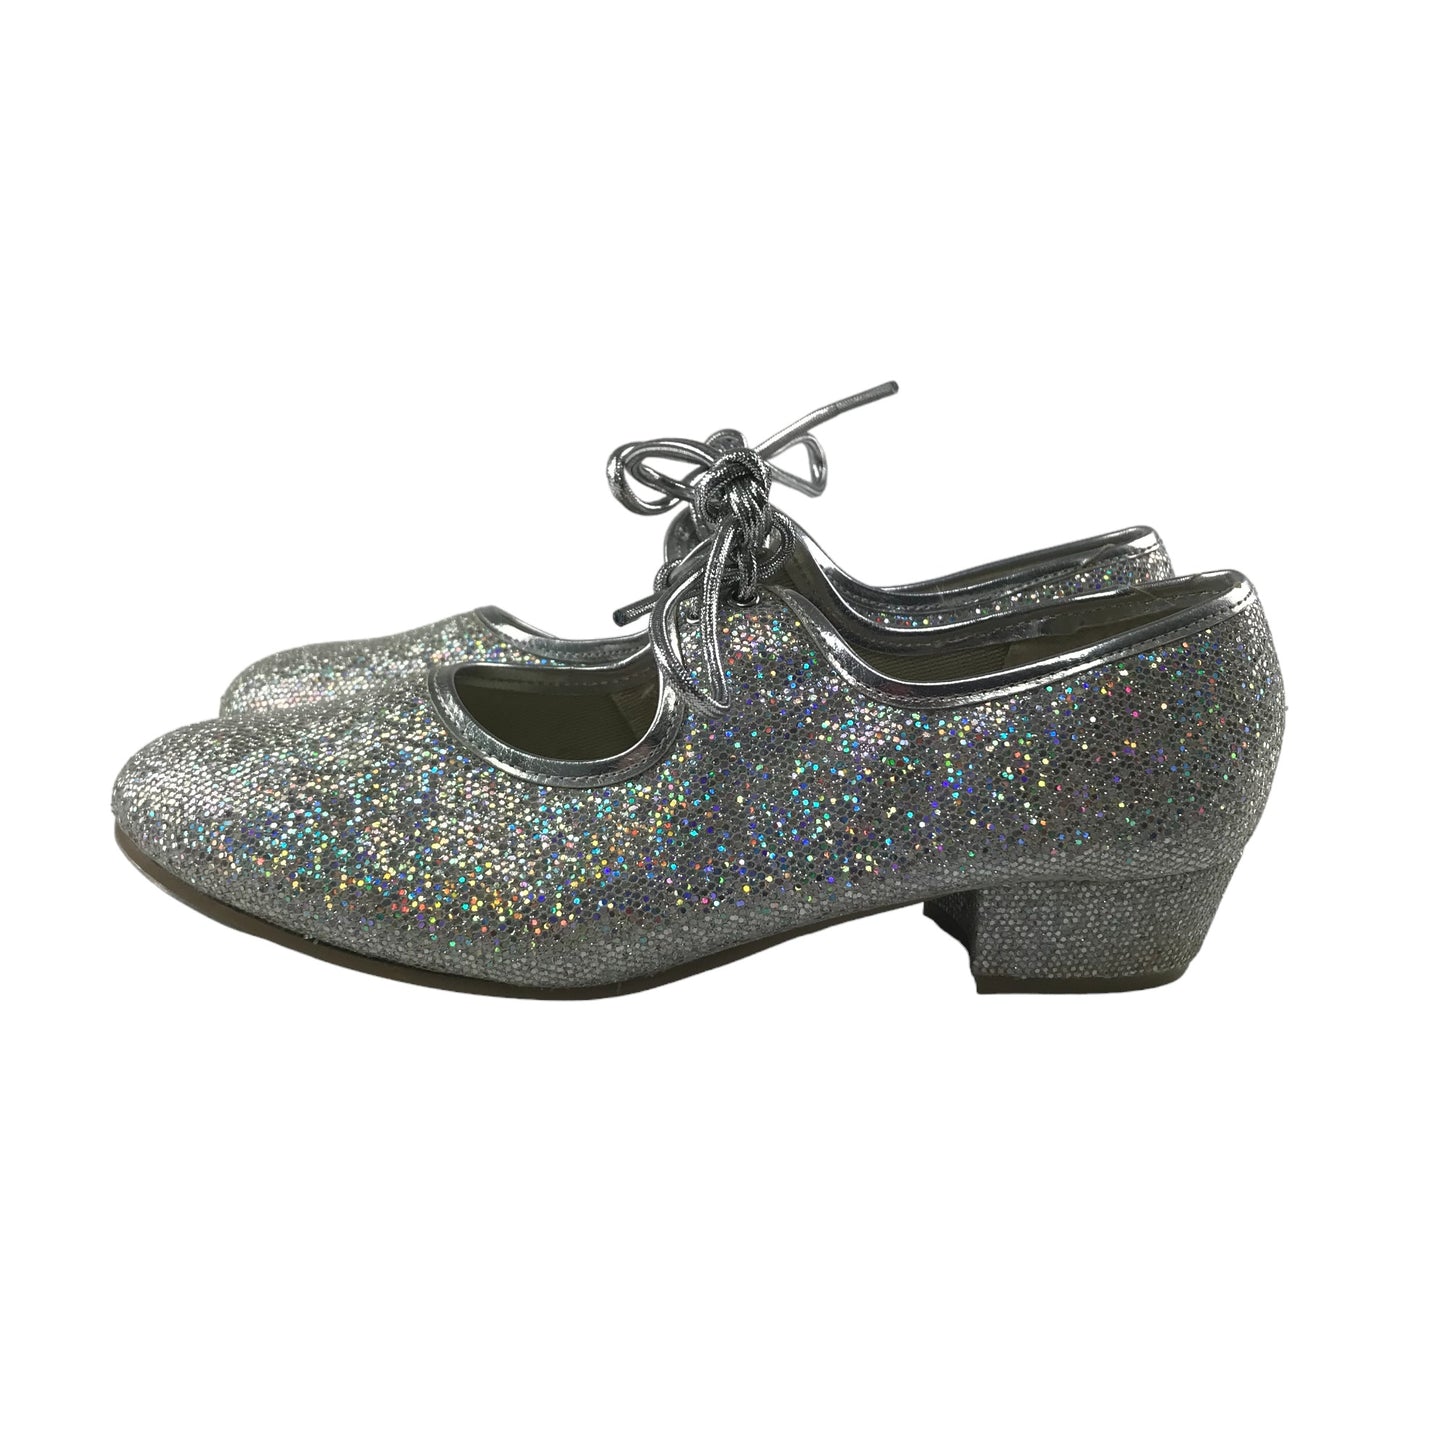 Tappers and Pointers Kitten Heel Dance Shoes Shoe Size 3 Silver Glittery with Cross Bar